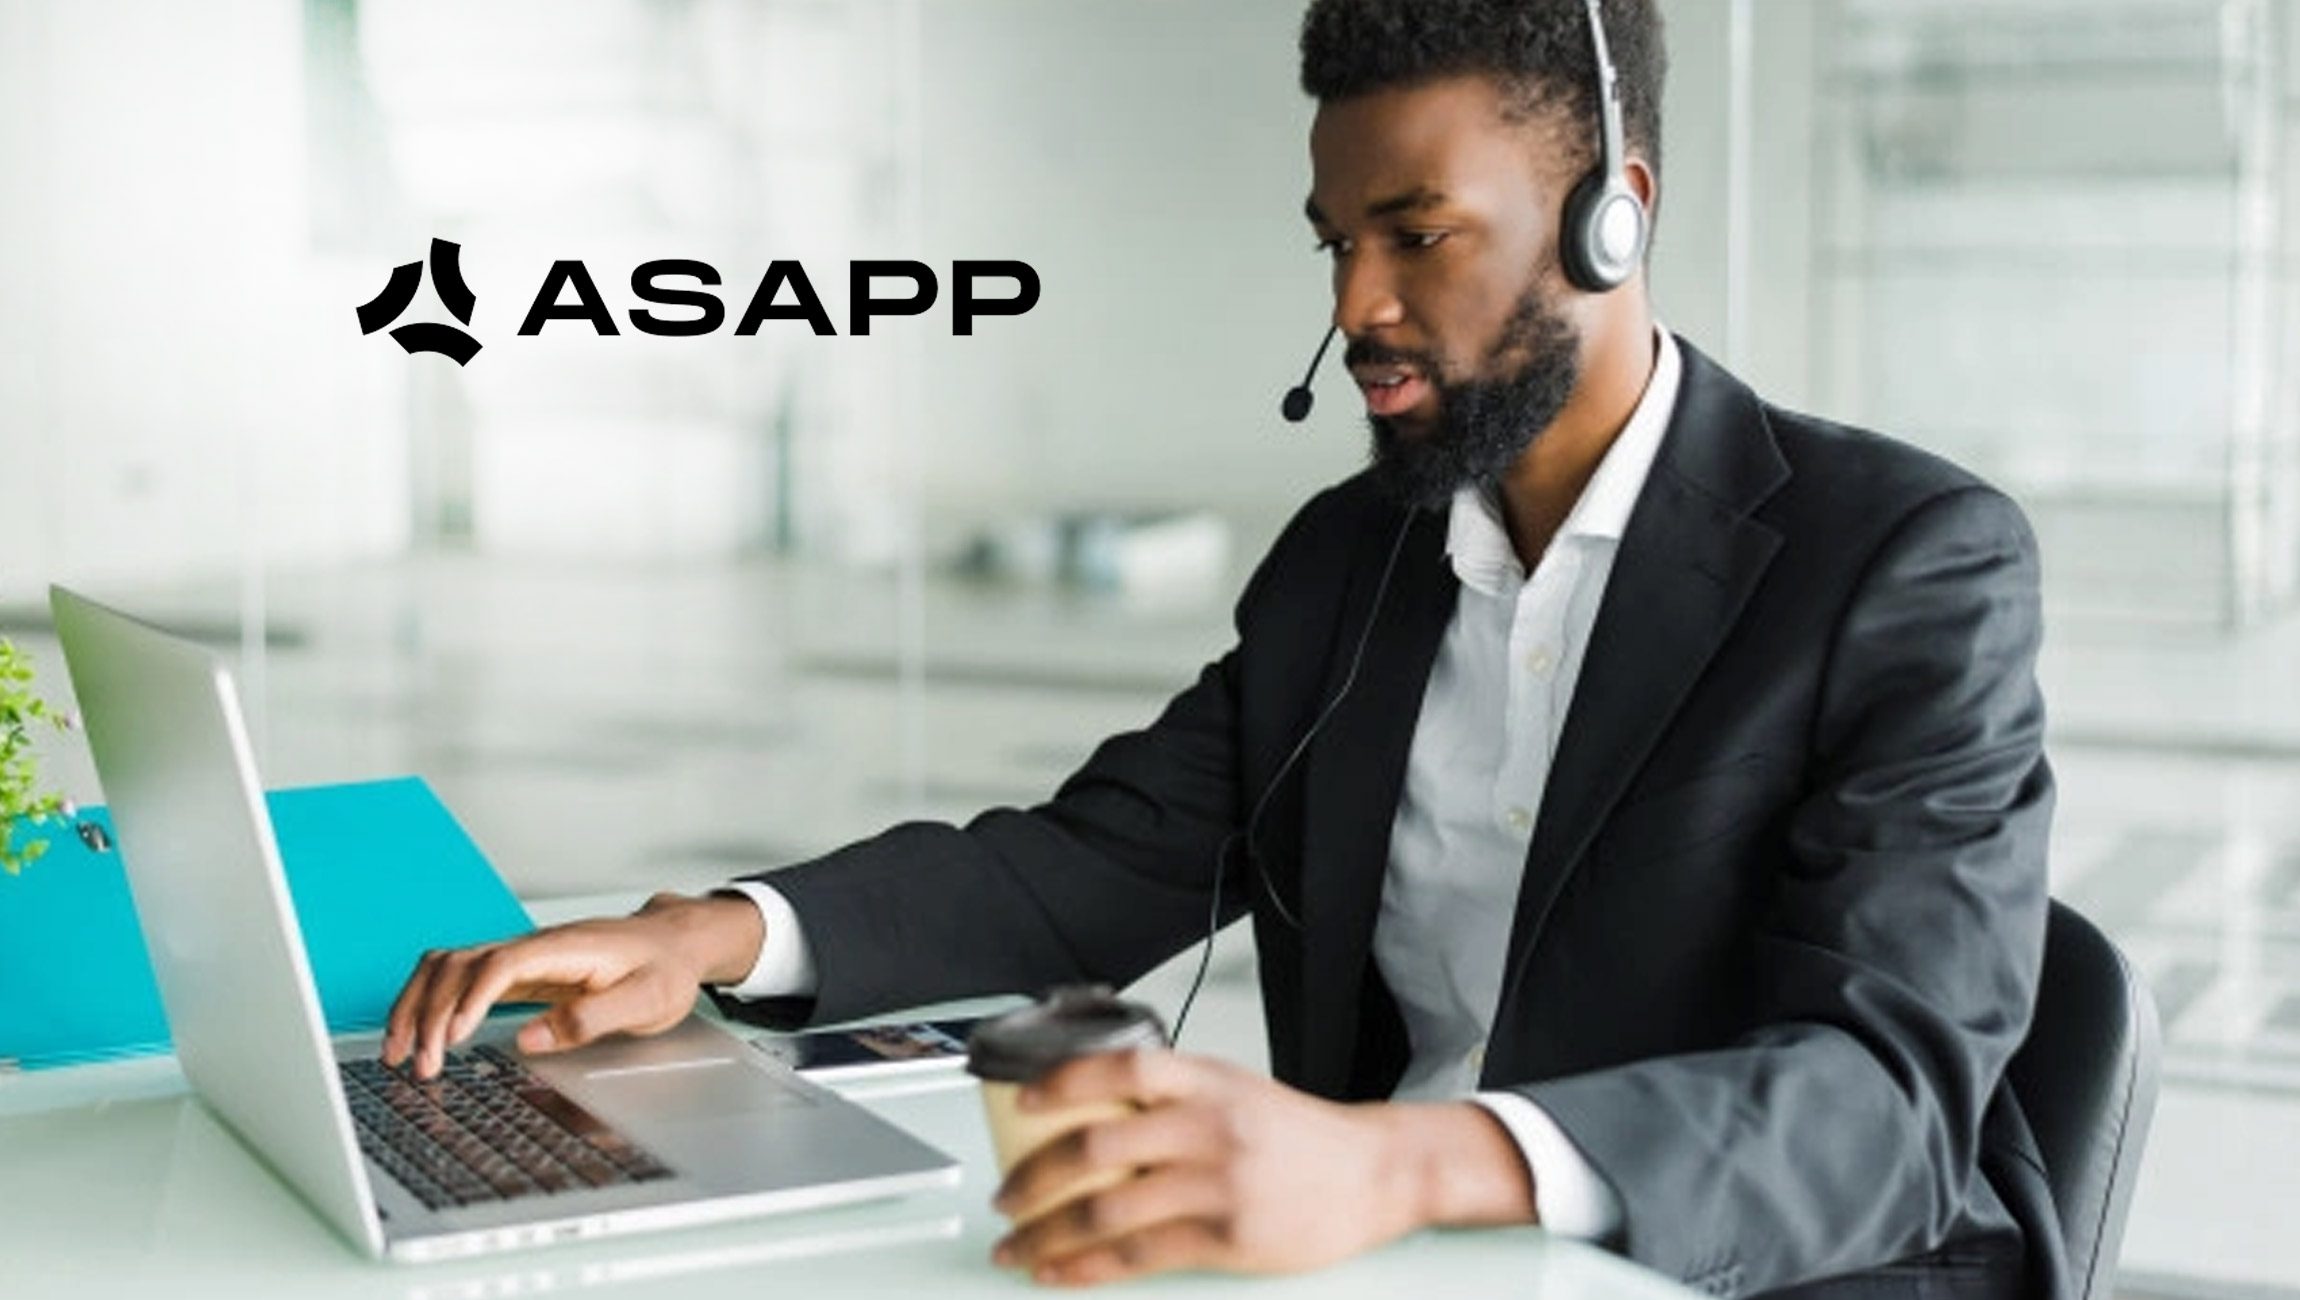 ASAPP Launches AutoSummary to Automate 100% of Call Summaries for Contact Centers